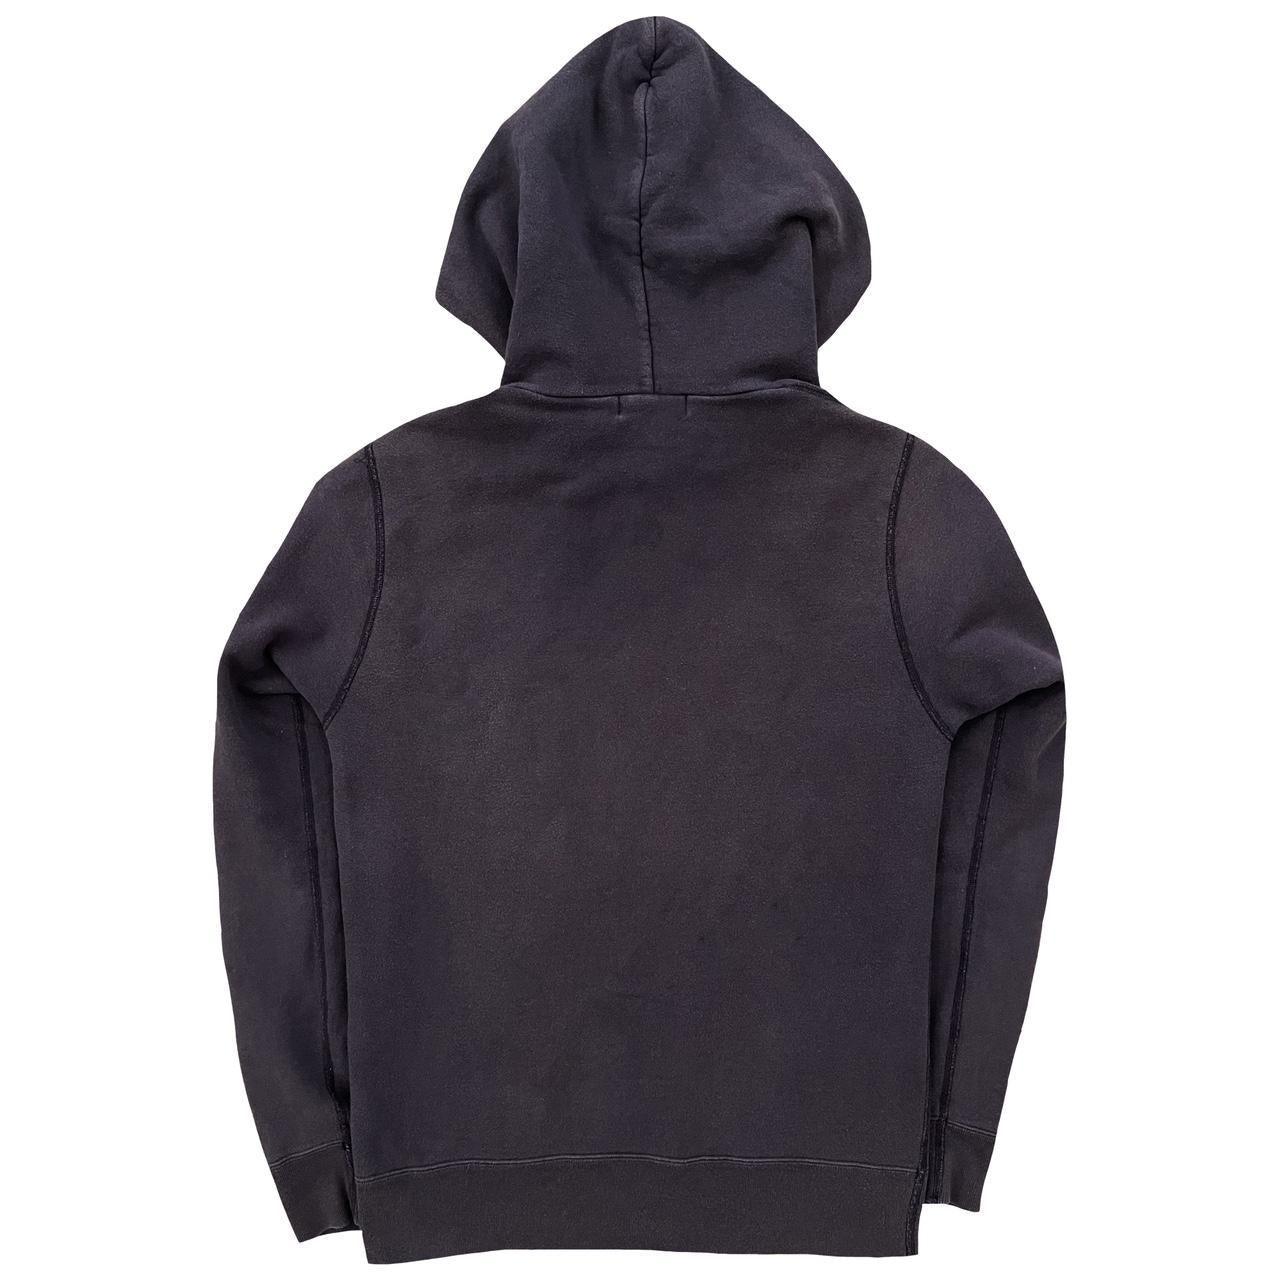 Hysteric Glamour Hoodie - Known Source